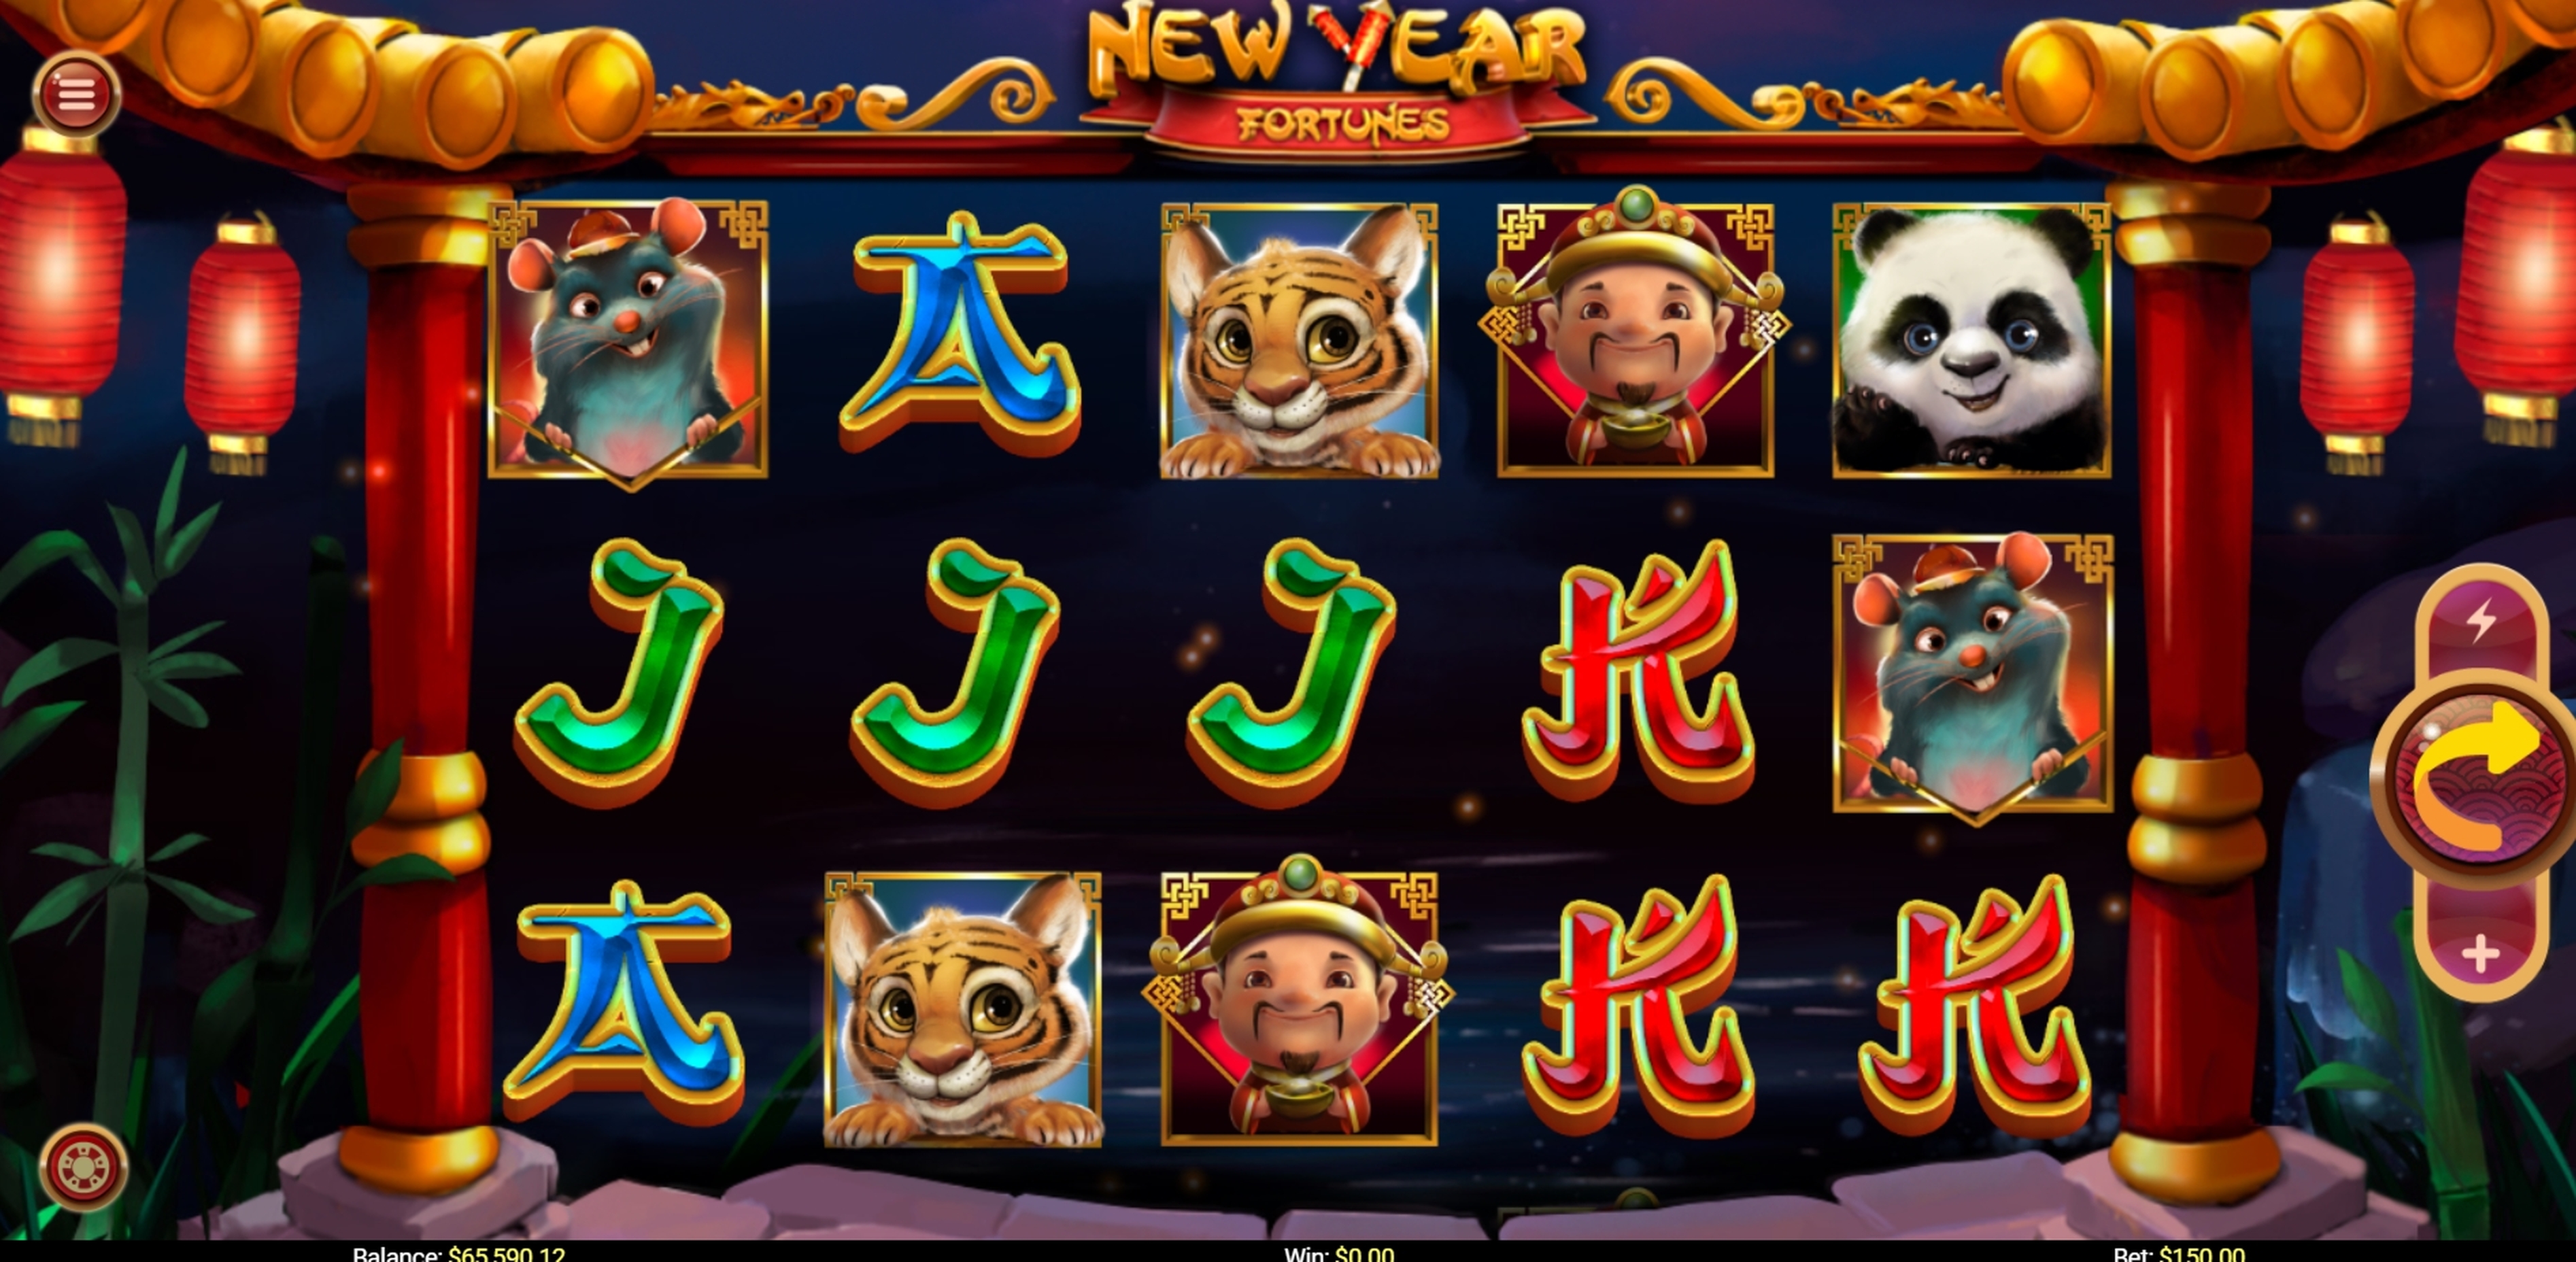 Reels in New Year Fortunes Slot Game by Mobilots